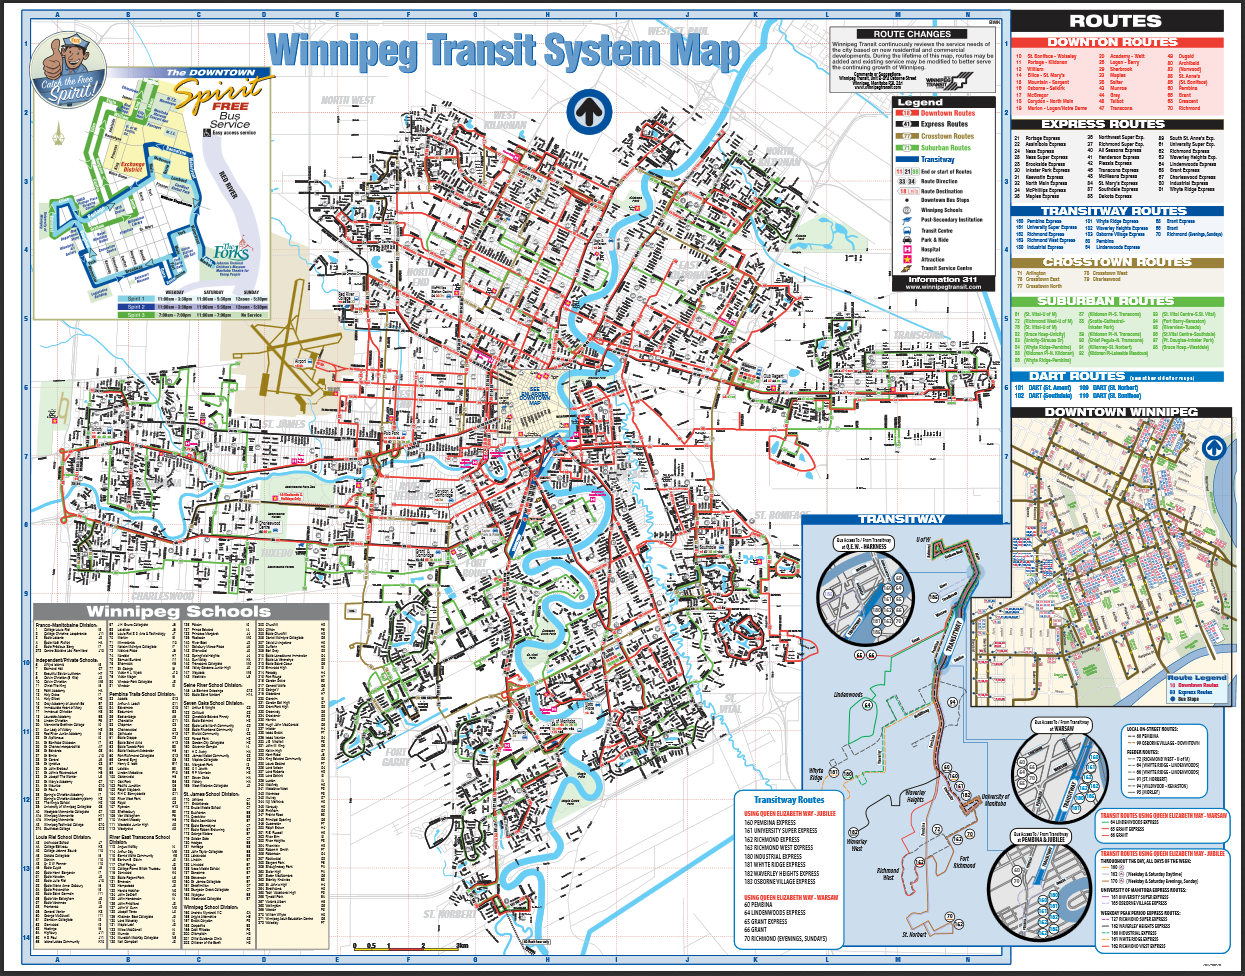 An old Winnipeg Transit route map from 2014 depicting the enormous size of the system.